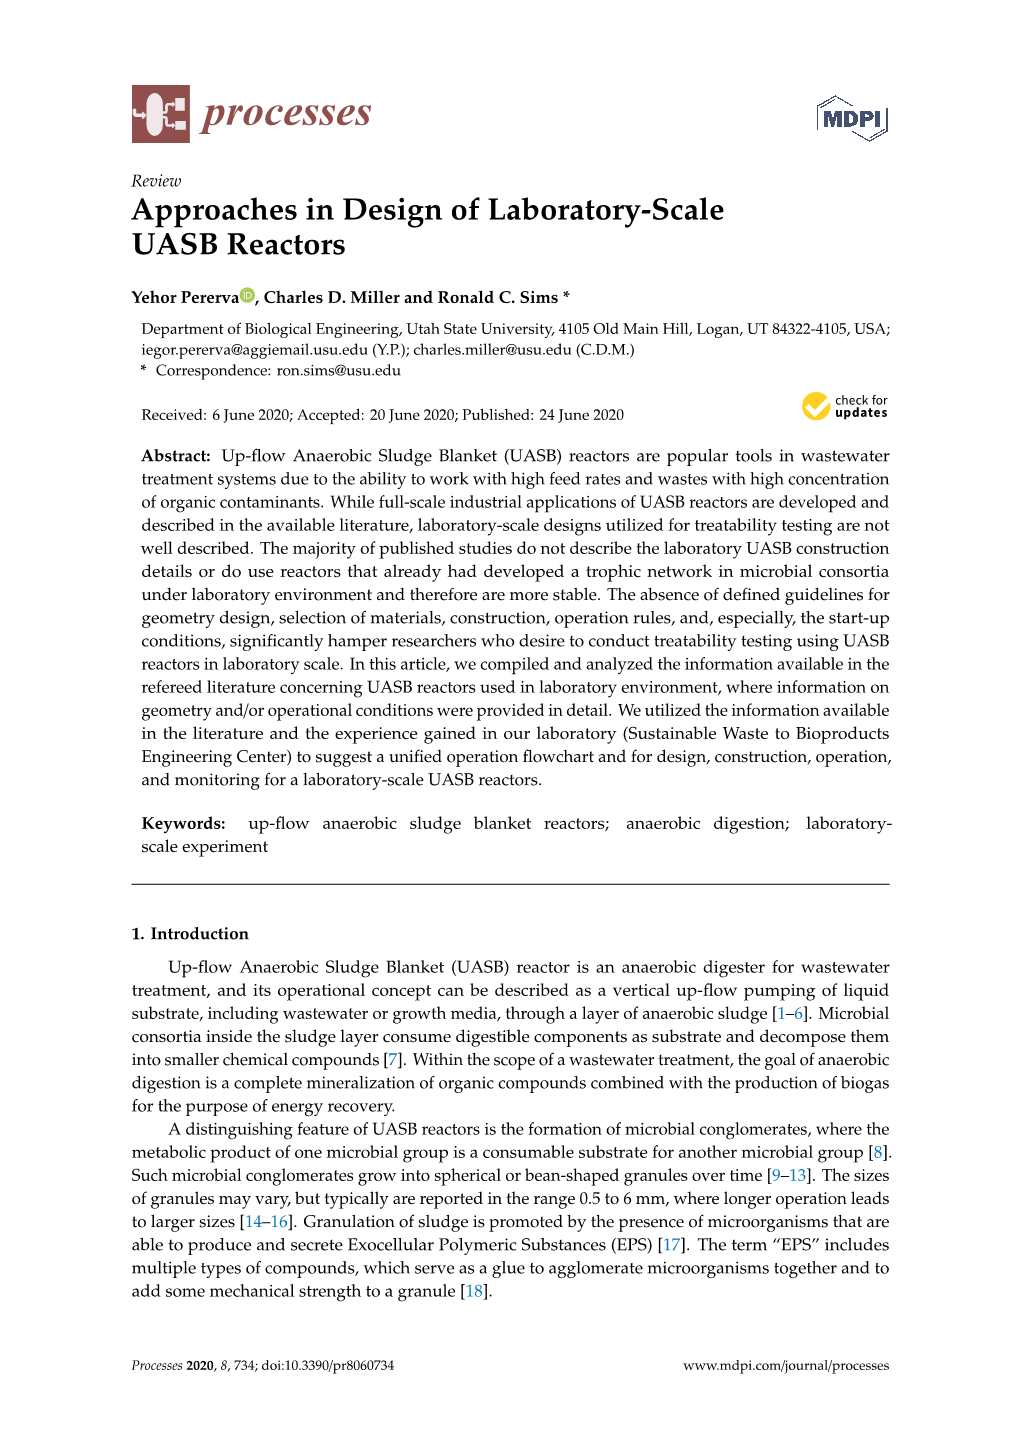 Approaches in Design of Laboratory-Scale UASB Reactors